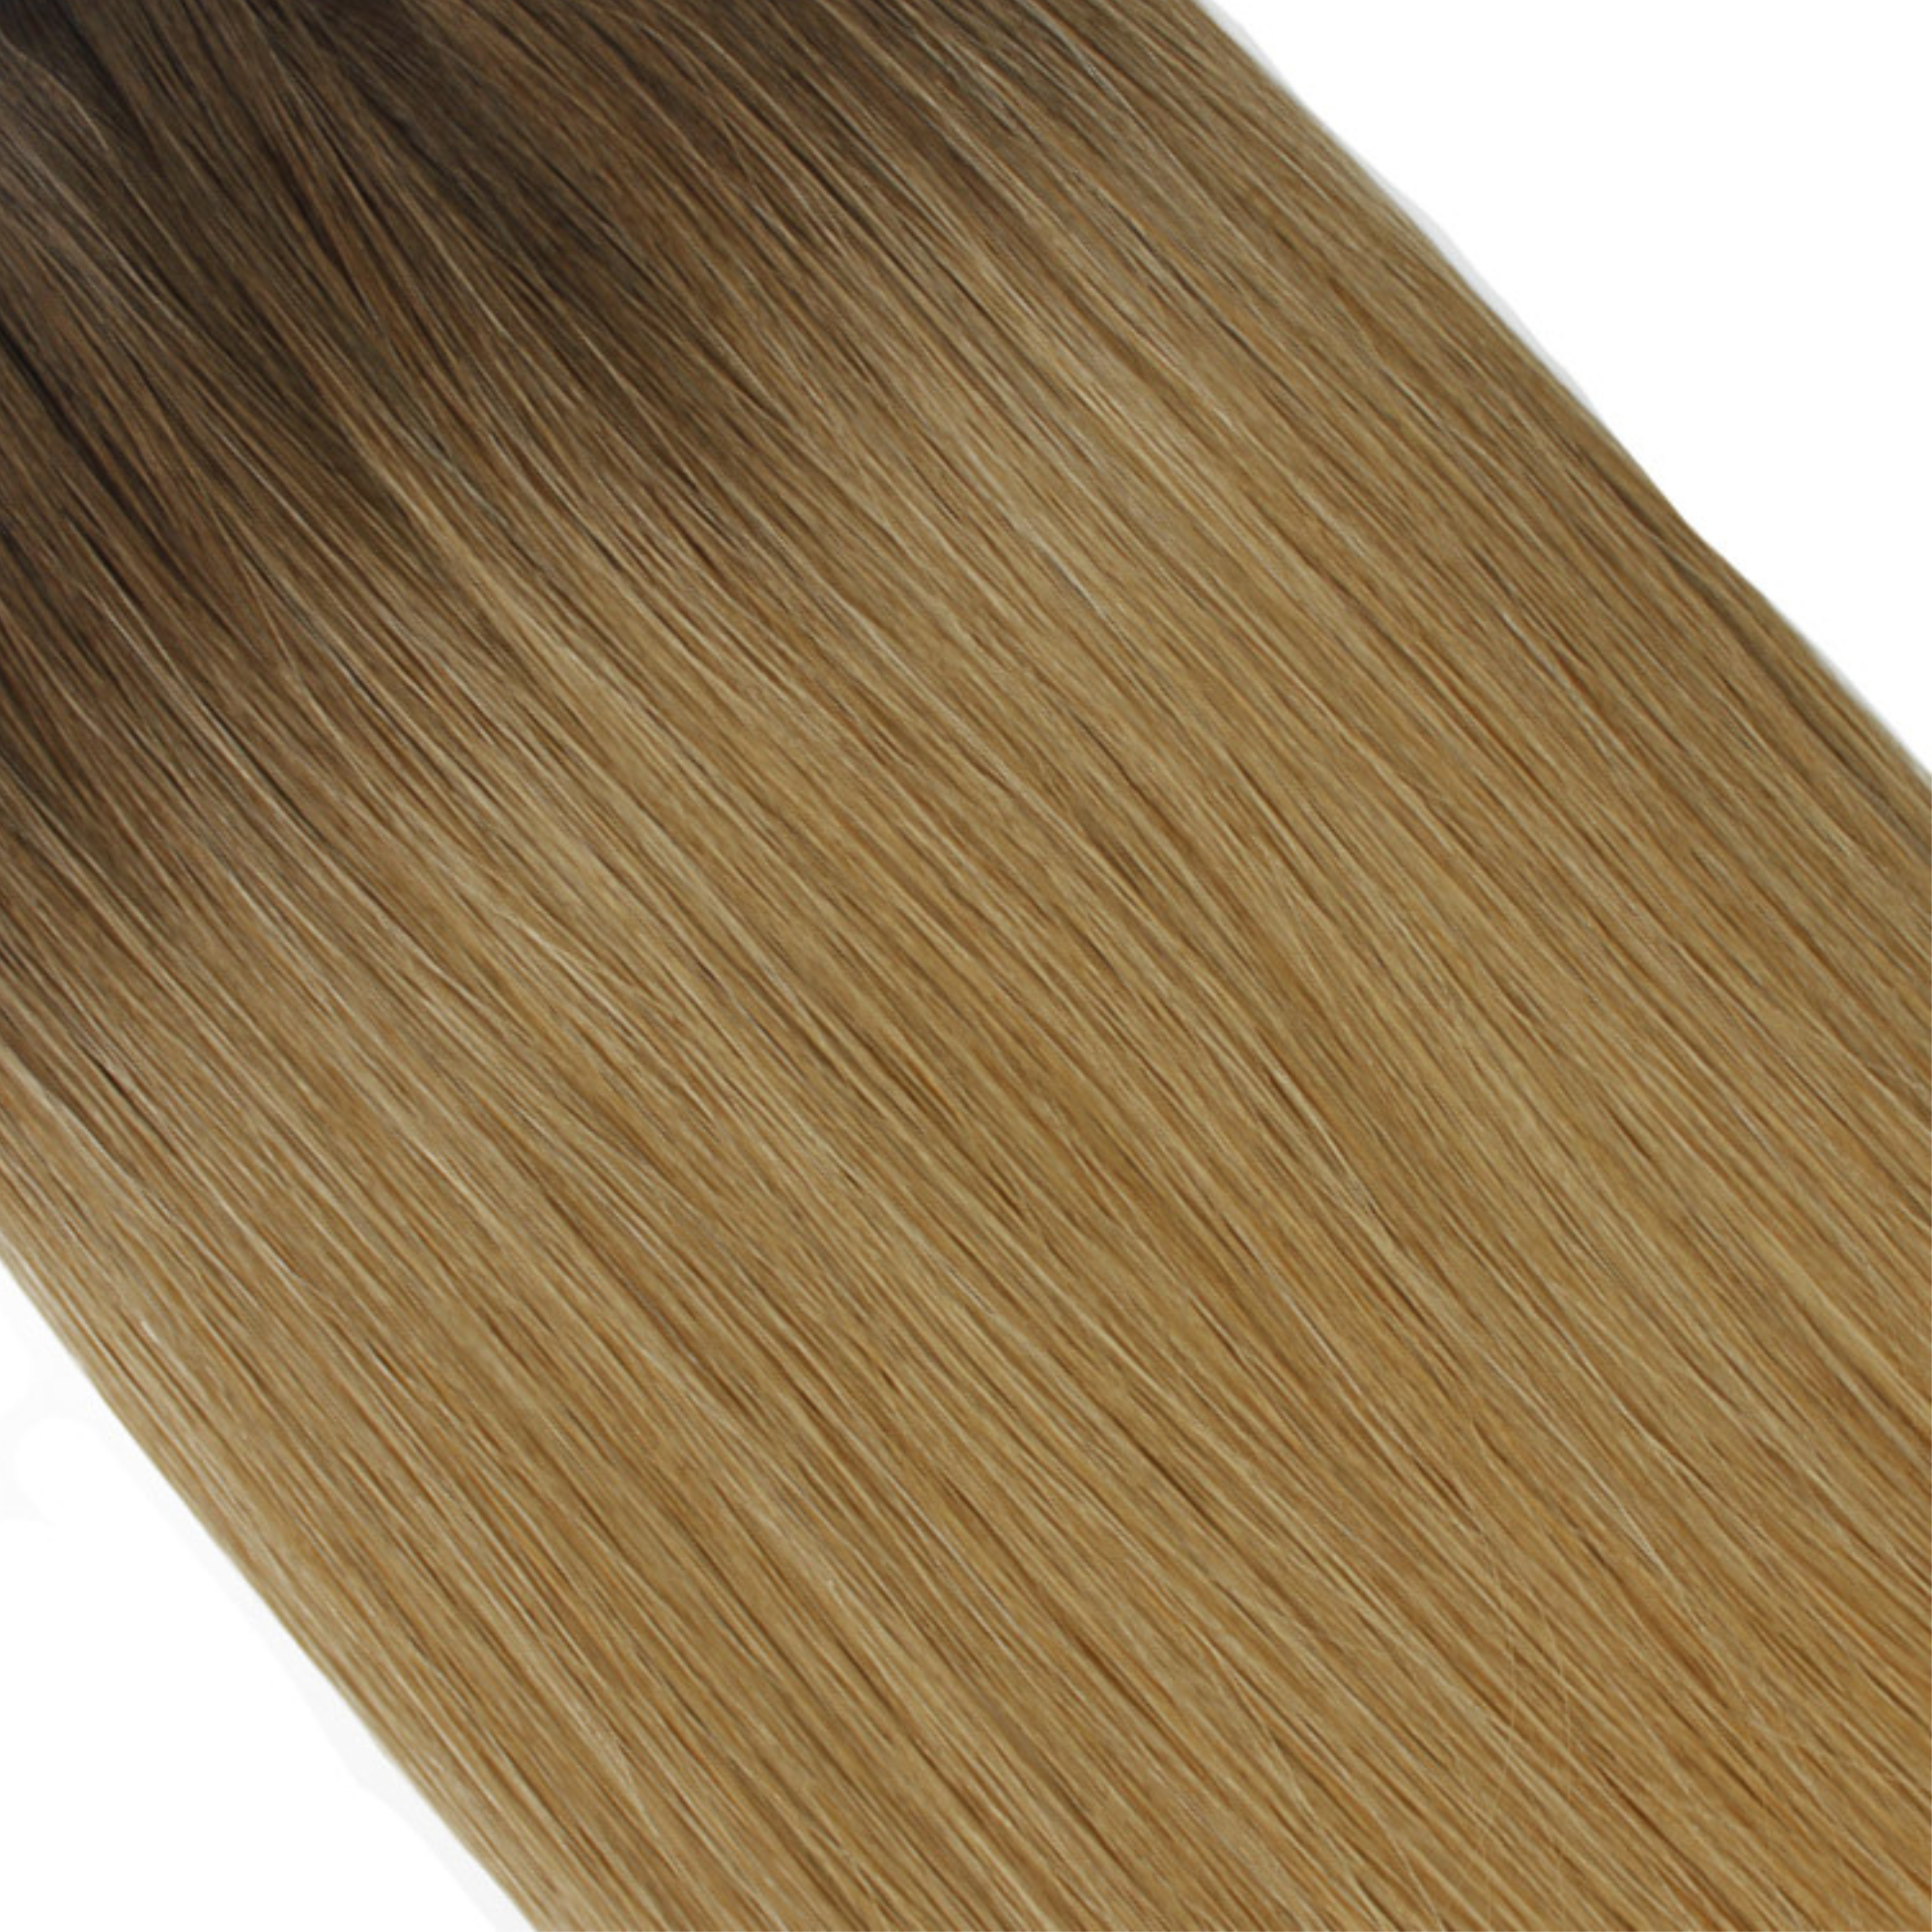 "hair rehab london 18" weft hair extensions shade swatch titled rooted boho"